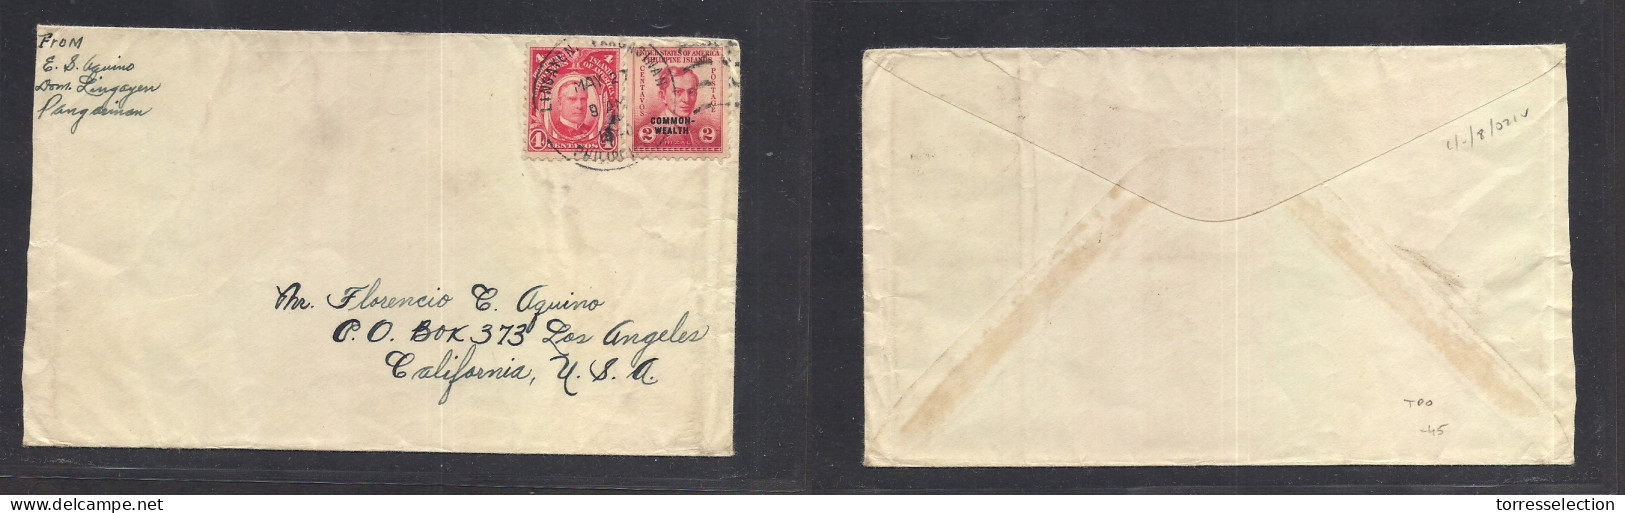 PHILIPPINES. 1940 (27 May) TPO Lingayen Pangasinan - USA, CA, LA. Mixed Issue Multifkd Env VF TPO Difficult To Read Comp - Filippine